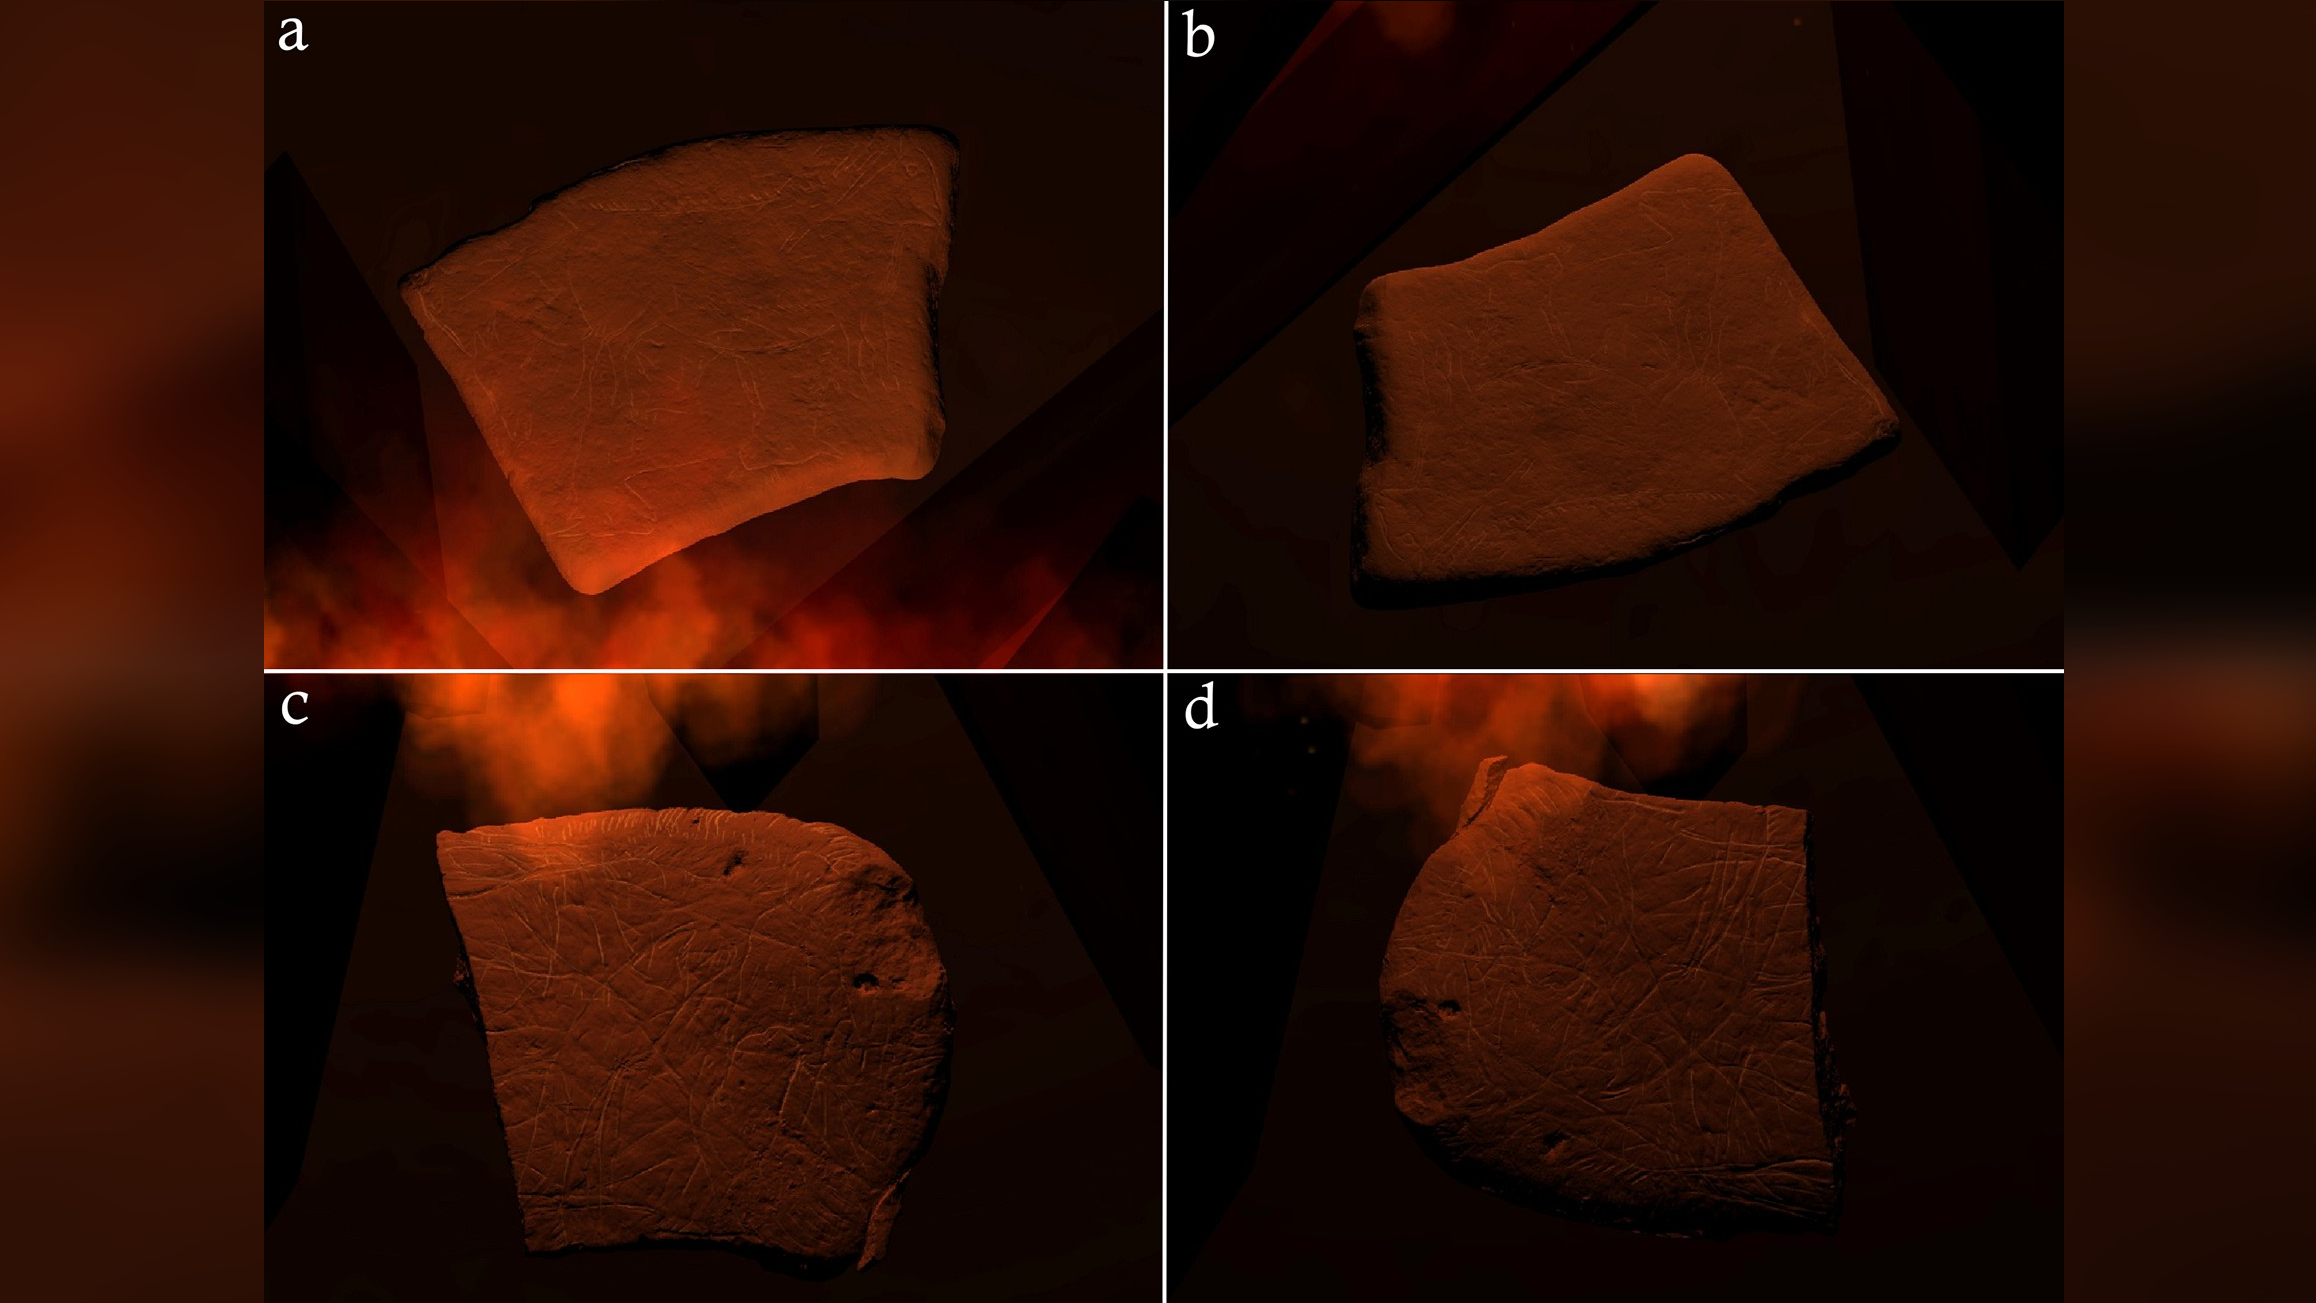 The experiments with 3-dimensional scans of the carved plaquettes and firelight generated with computers revealed that different portraits of animals may have been animated by the flickering firelight.